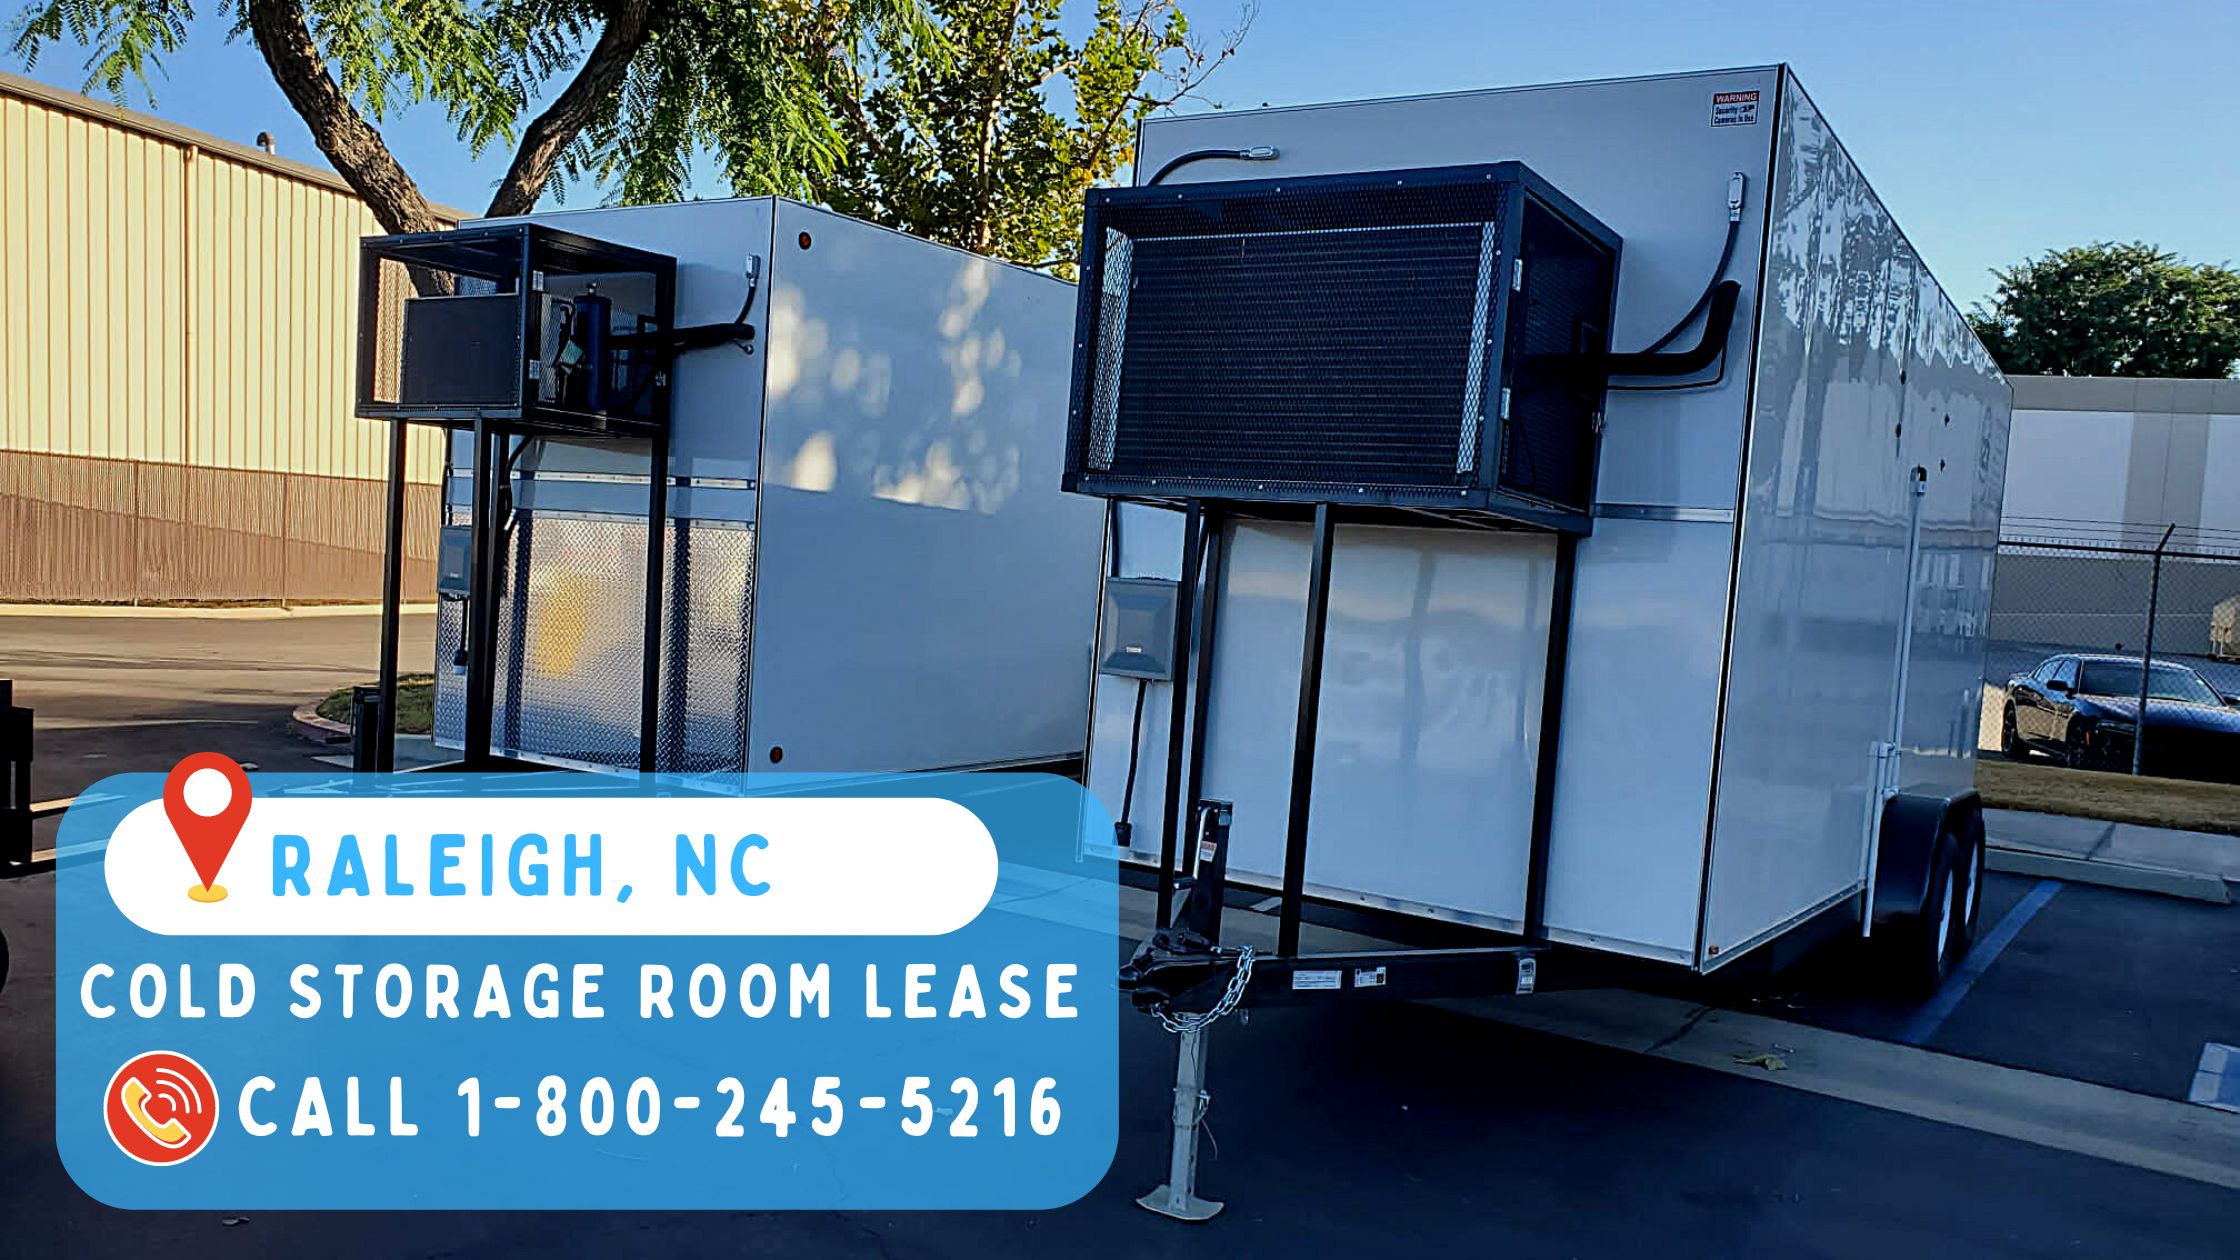 Cold Storage Room Lease in Raleigh